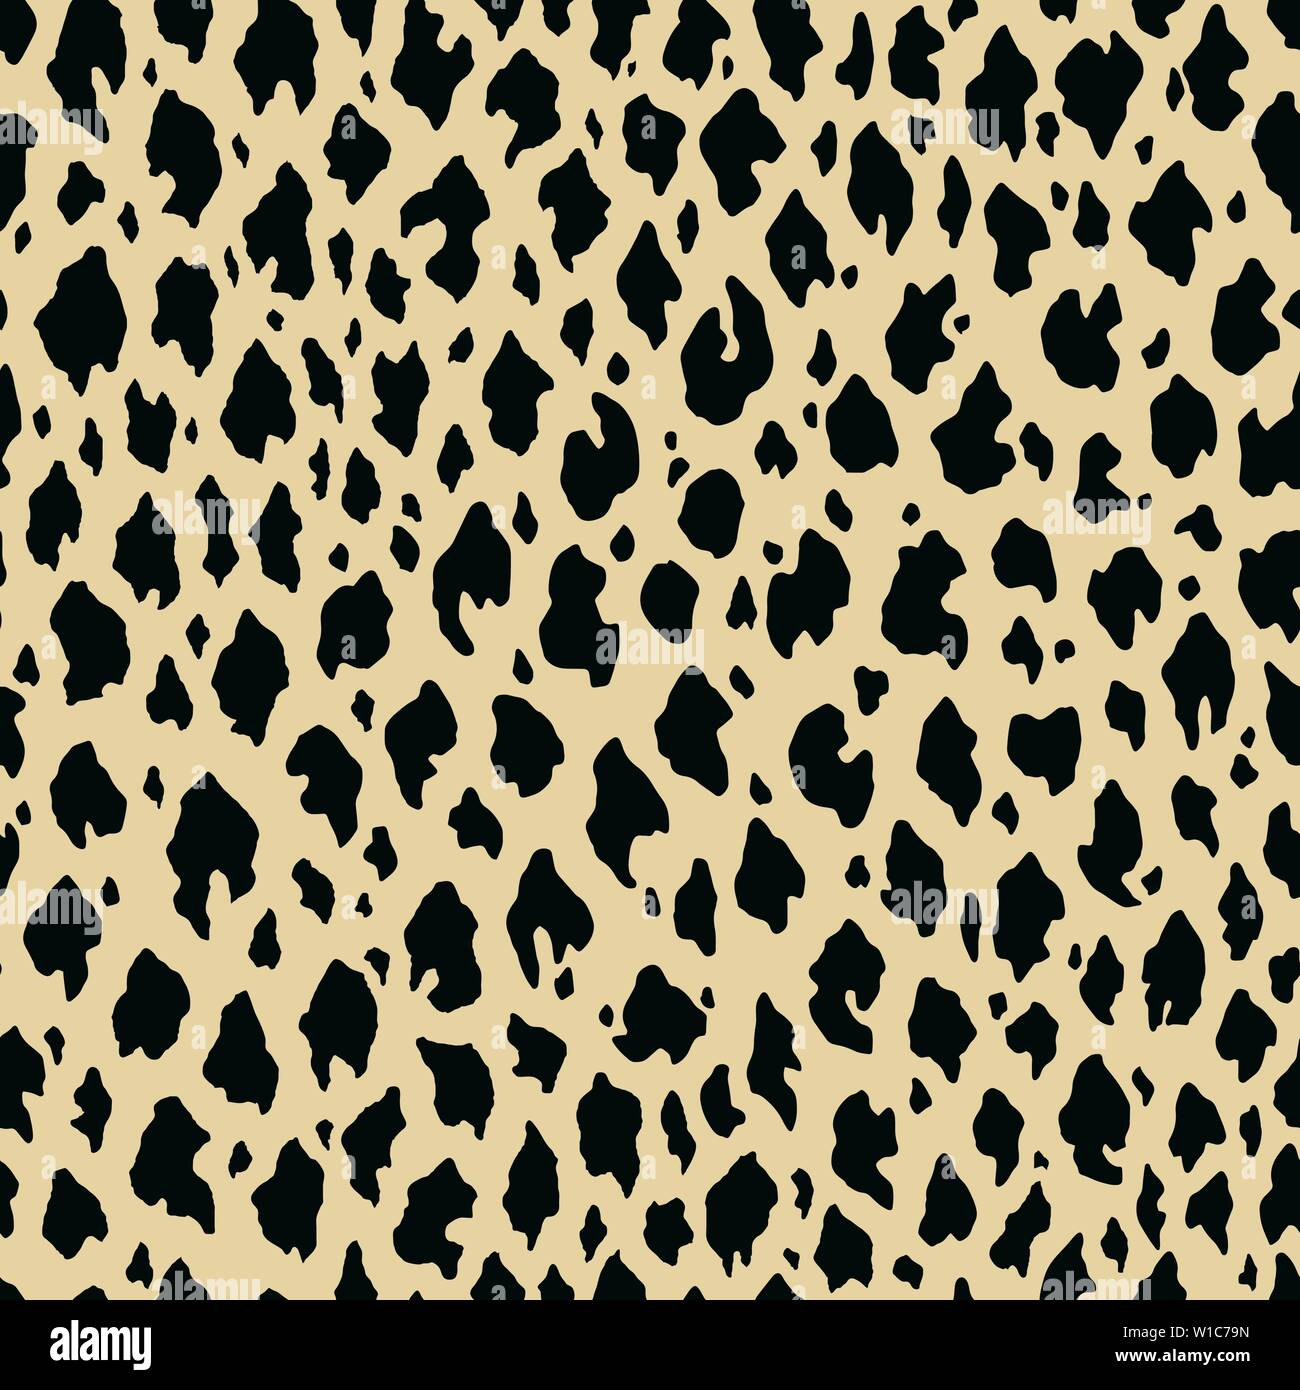 Leopard skin seamless pattern design. Vector illustration background. For print, textile, web, home decor, fashion, surface, graphic design Stock Vector